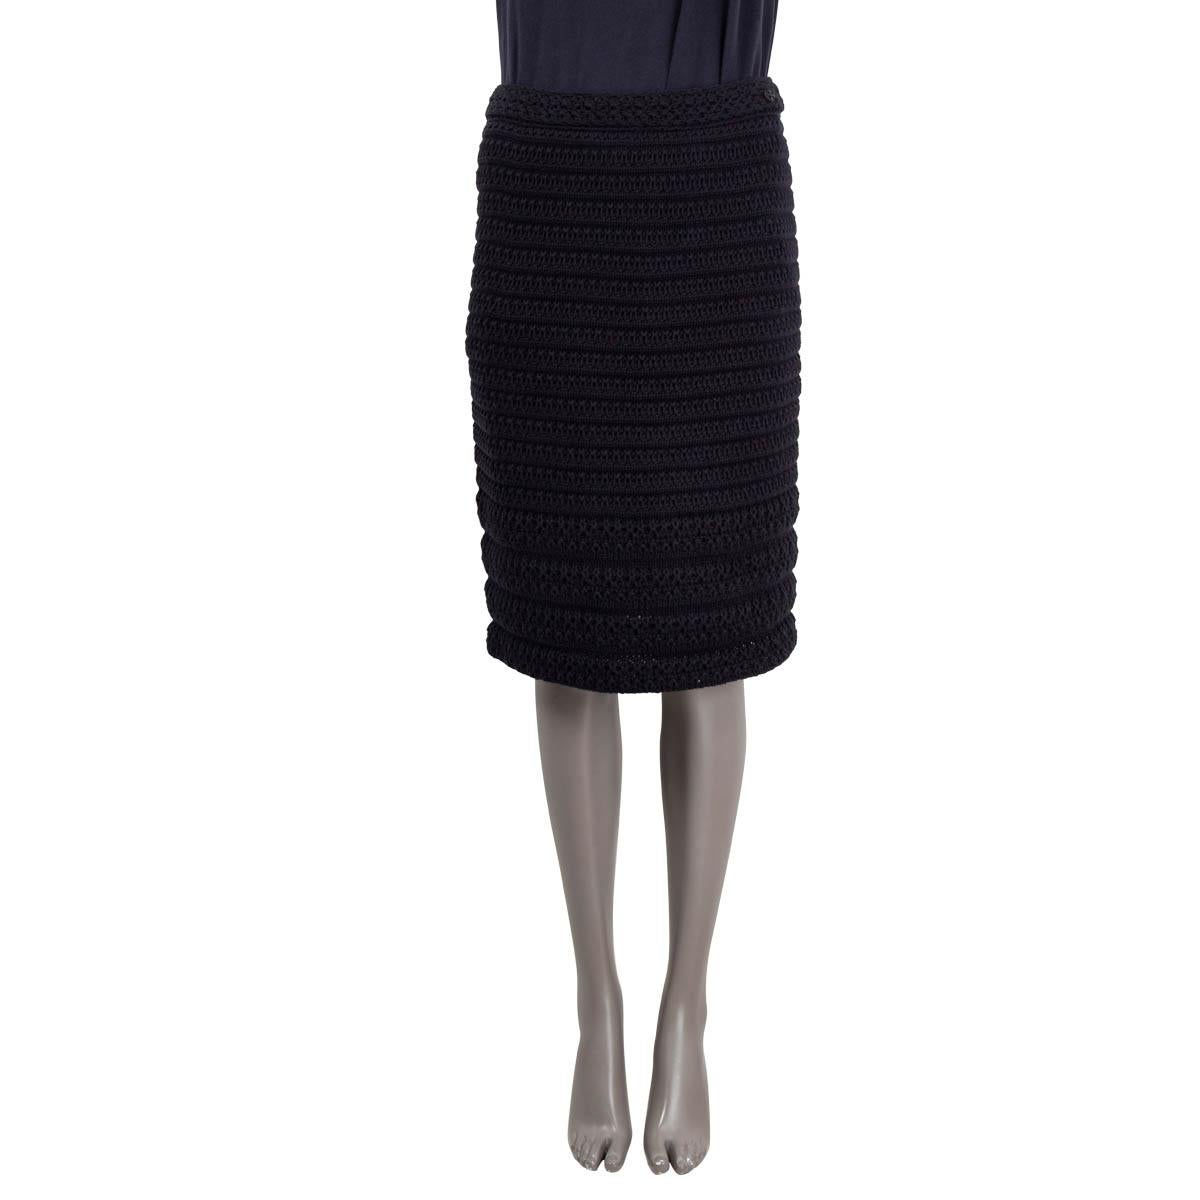 100% authentic Chanel crochet skirt in midnight blue cotton (100%). Opens with a zipper in the back and is lined in cotton (100%). Has been worn and is in excellent condition.

2011 Spring/Summer

Measurements
Model	Chanel11P
Tag